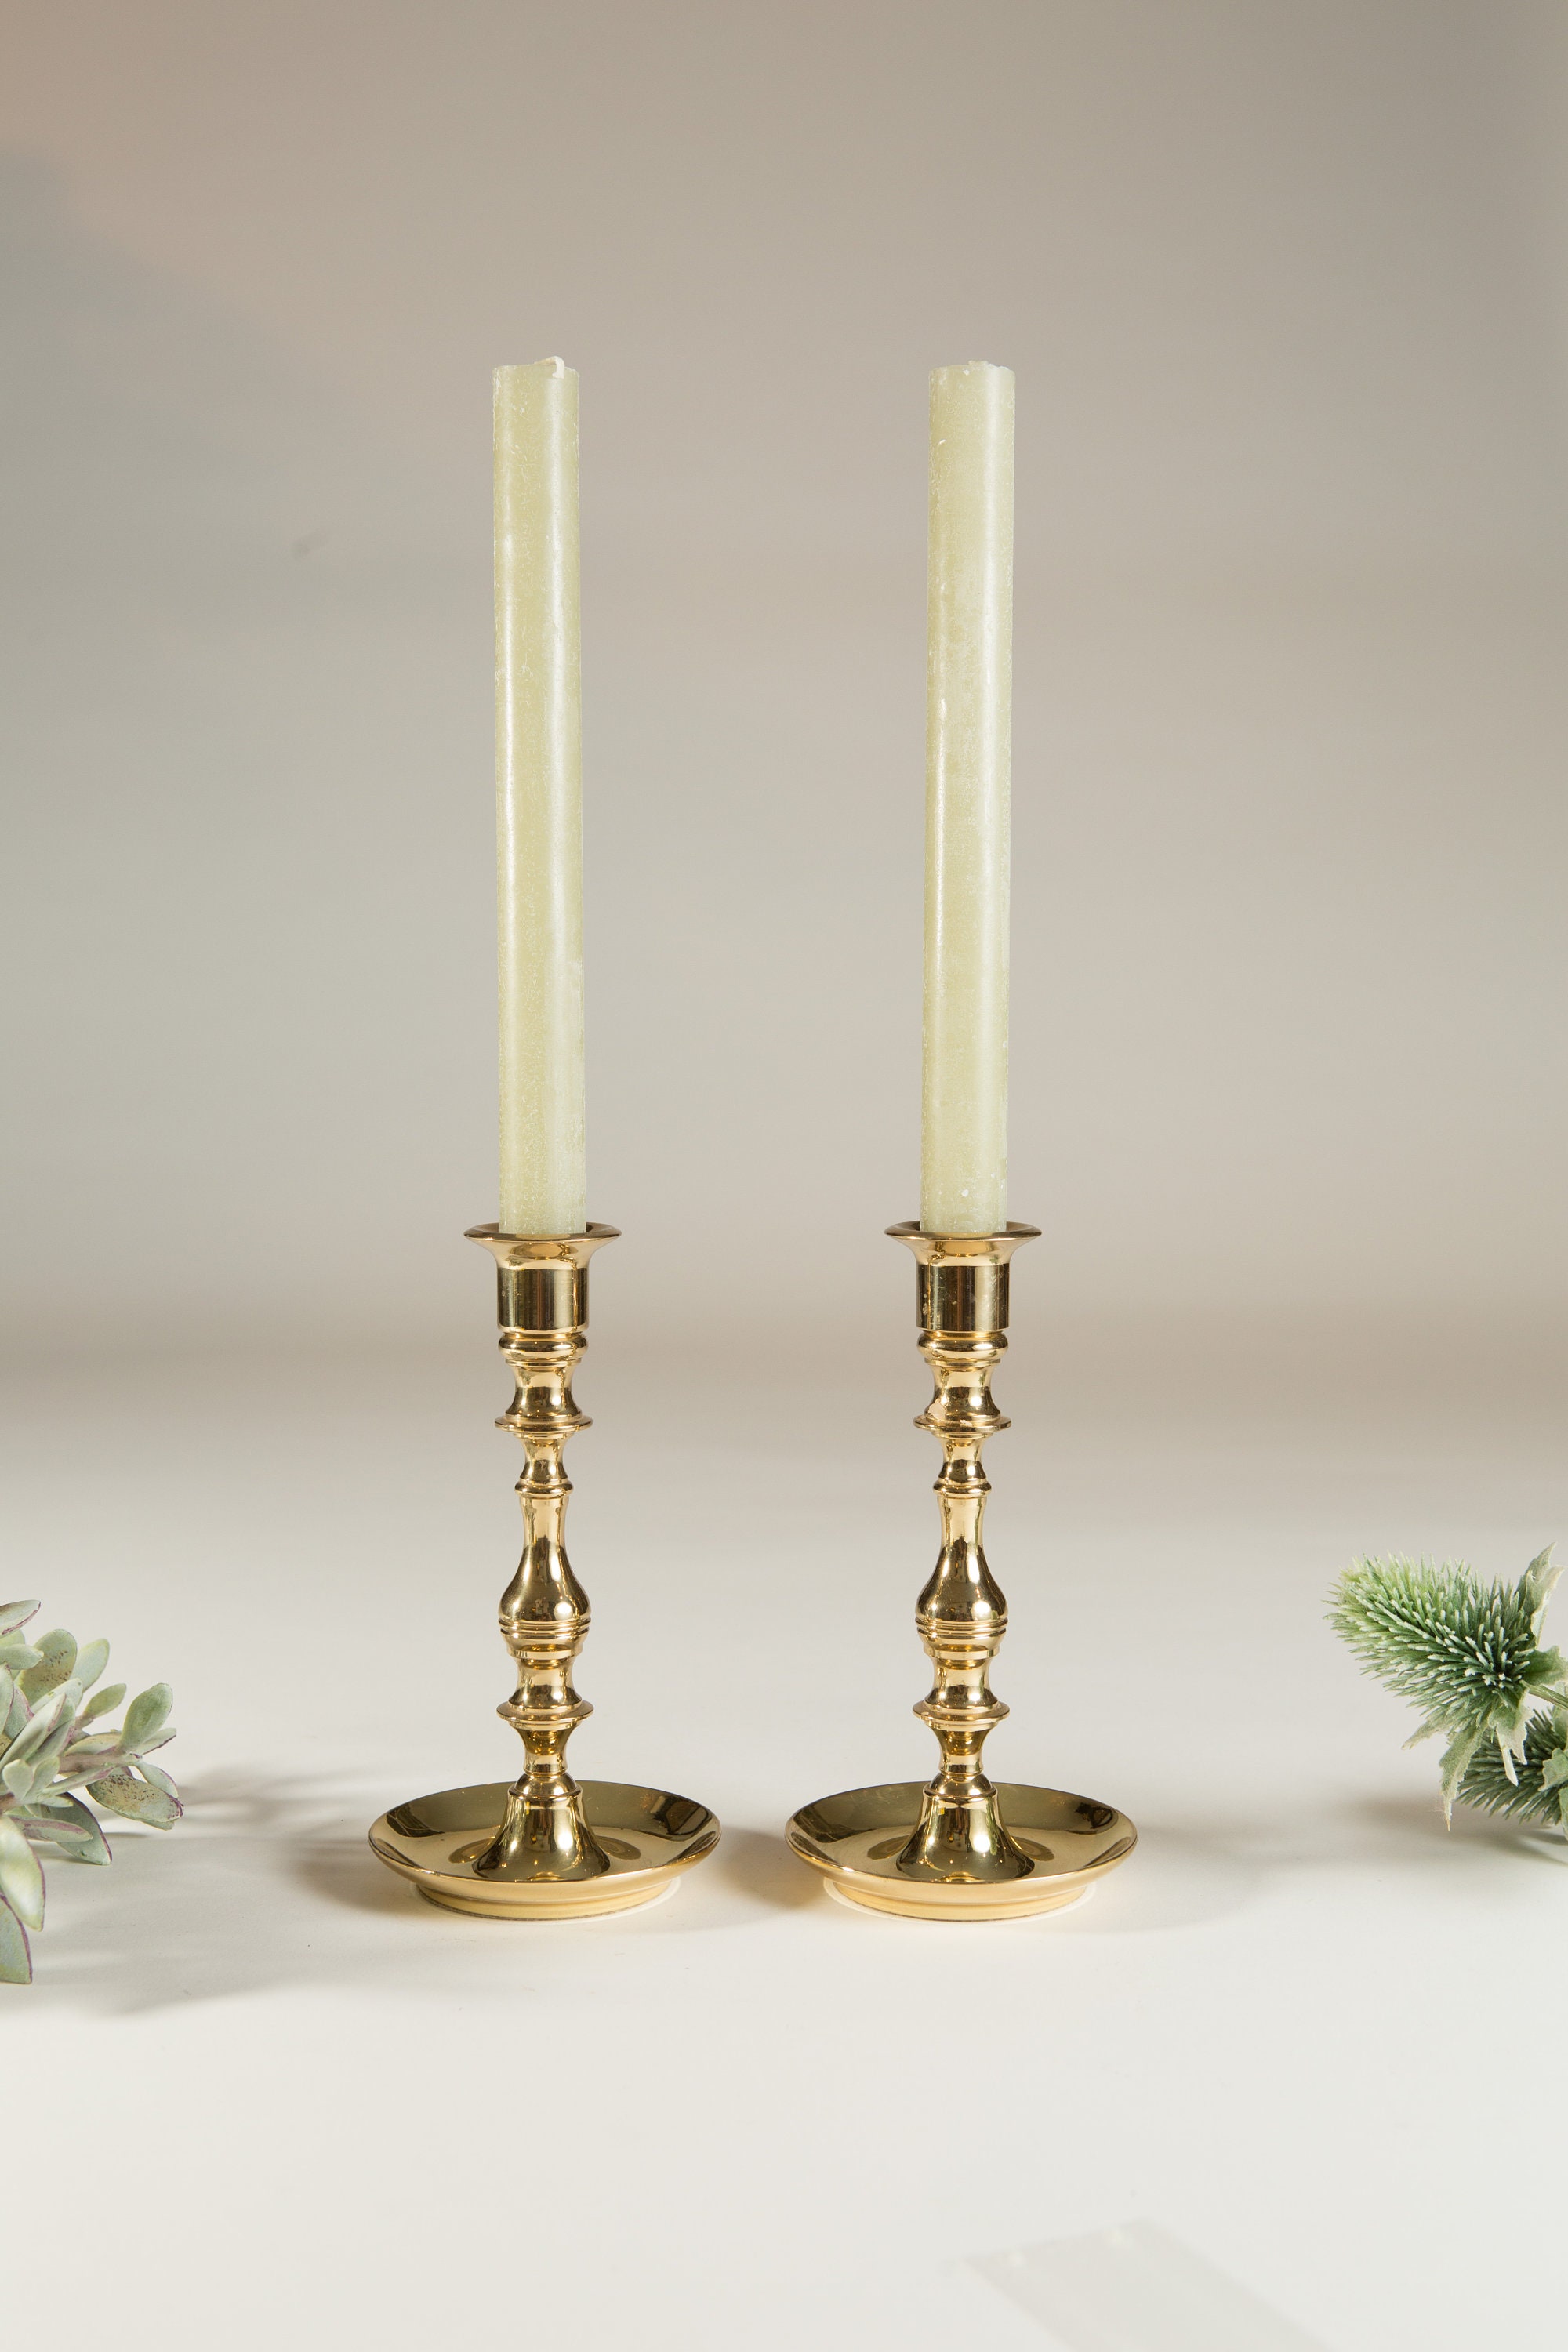 Brass Candlestick Holders - Pair of Vintage Baldwin 'Forged in America'  Table Centrepieces - Christmas Party Hollywood Regency Decor